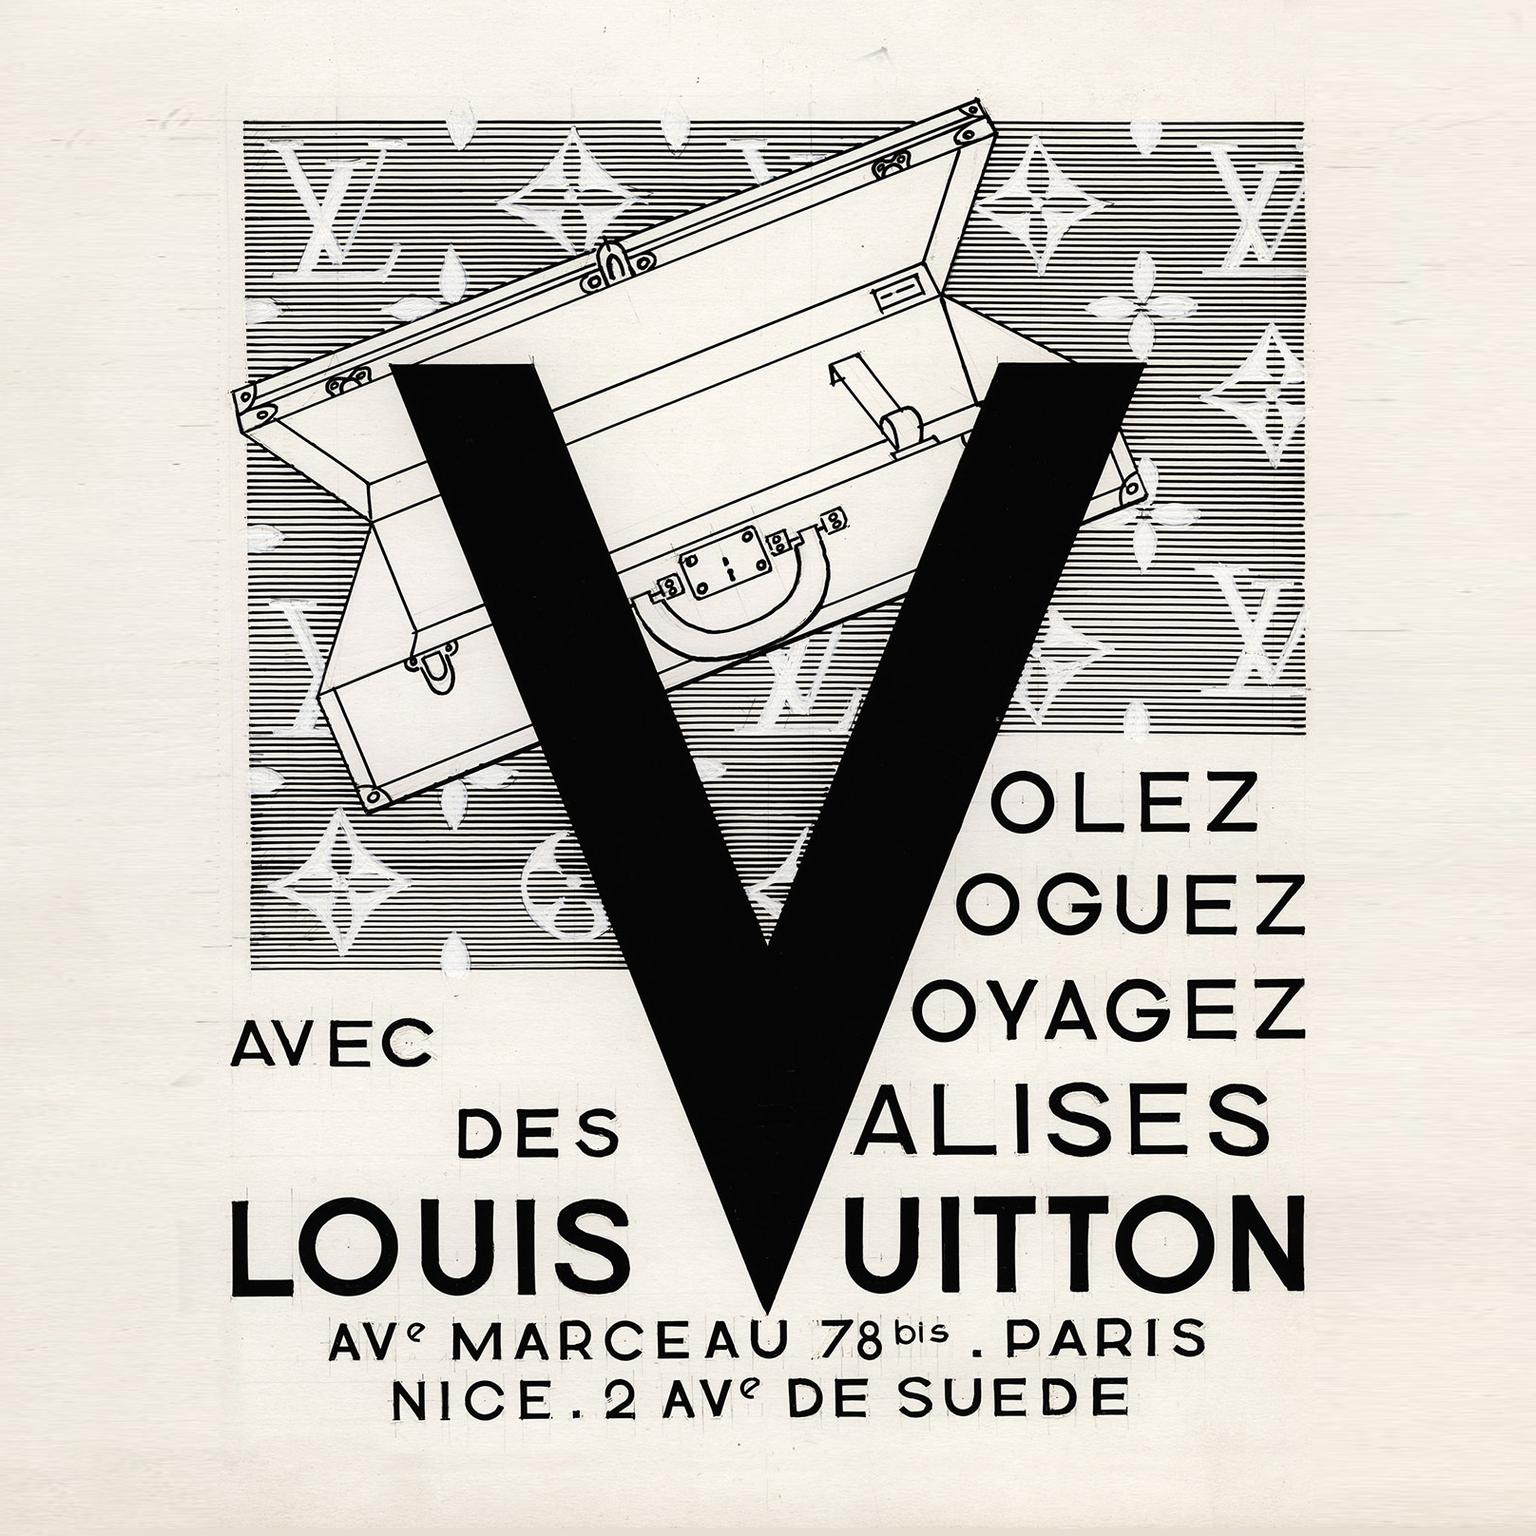 Louis Vuitton advertising from 1960s